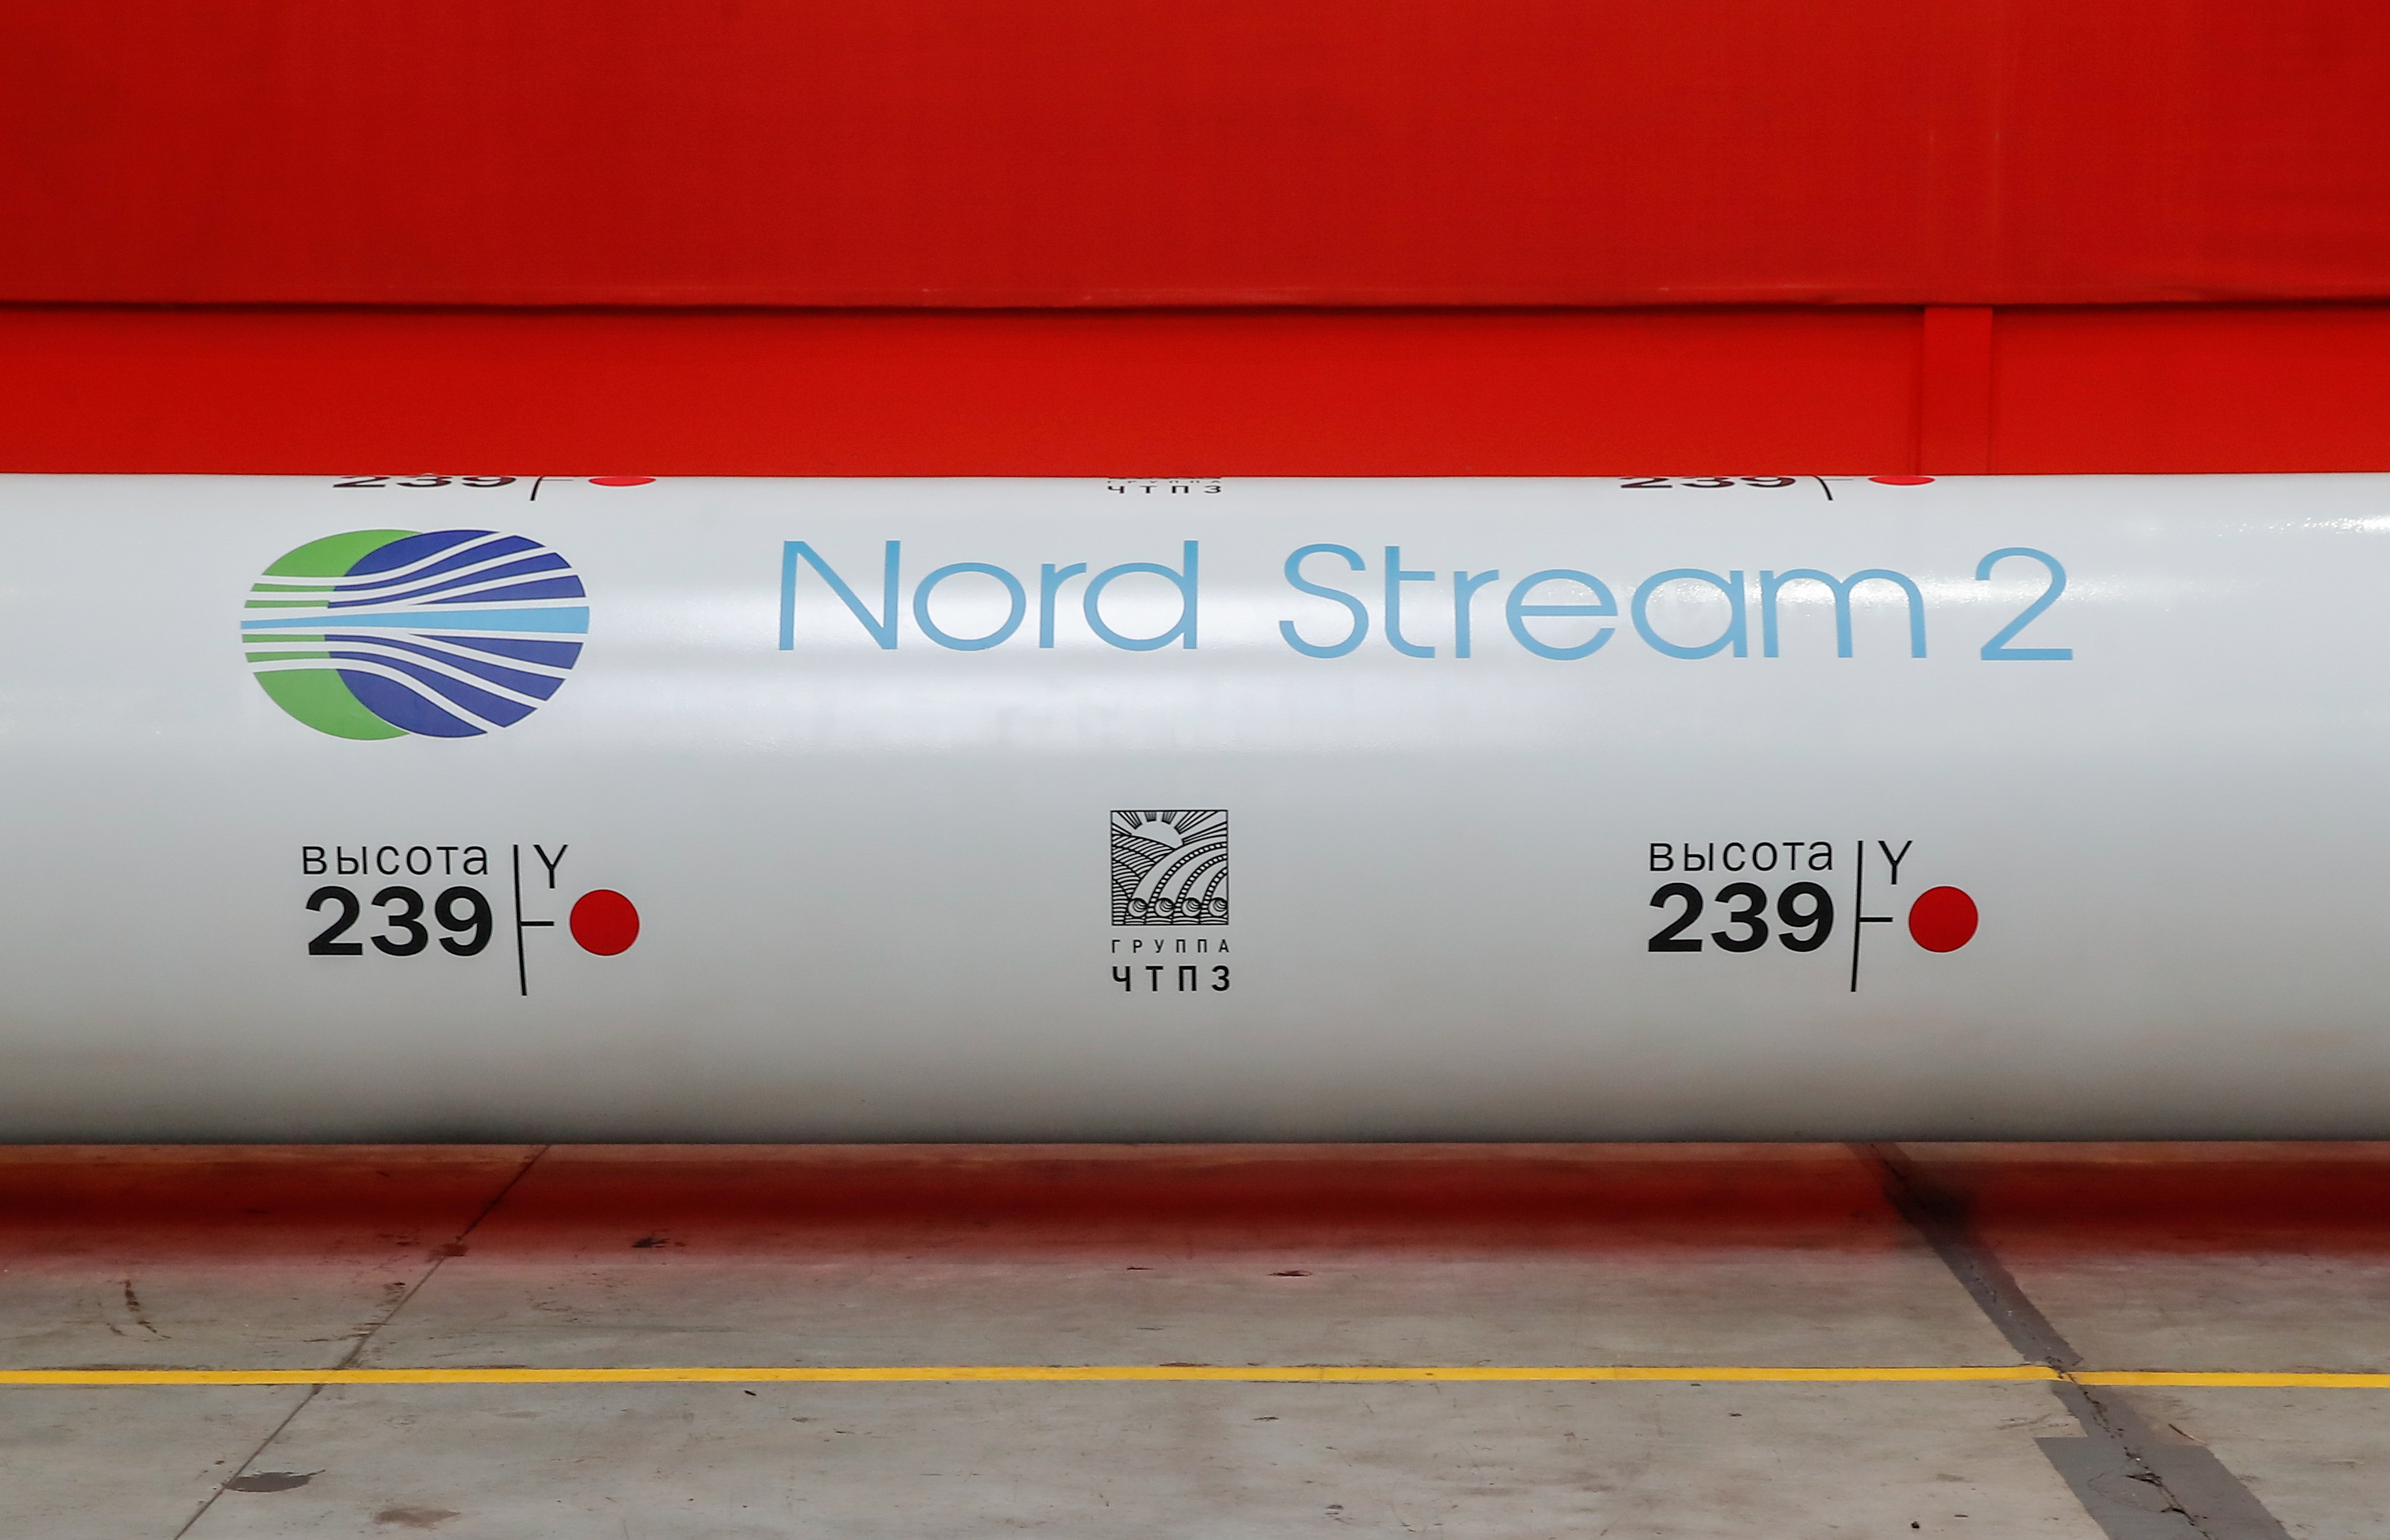 Germany has stopped the process of the Nord Stream 2 certification